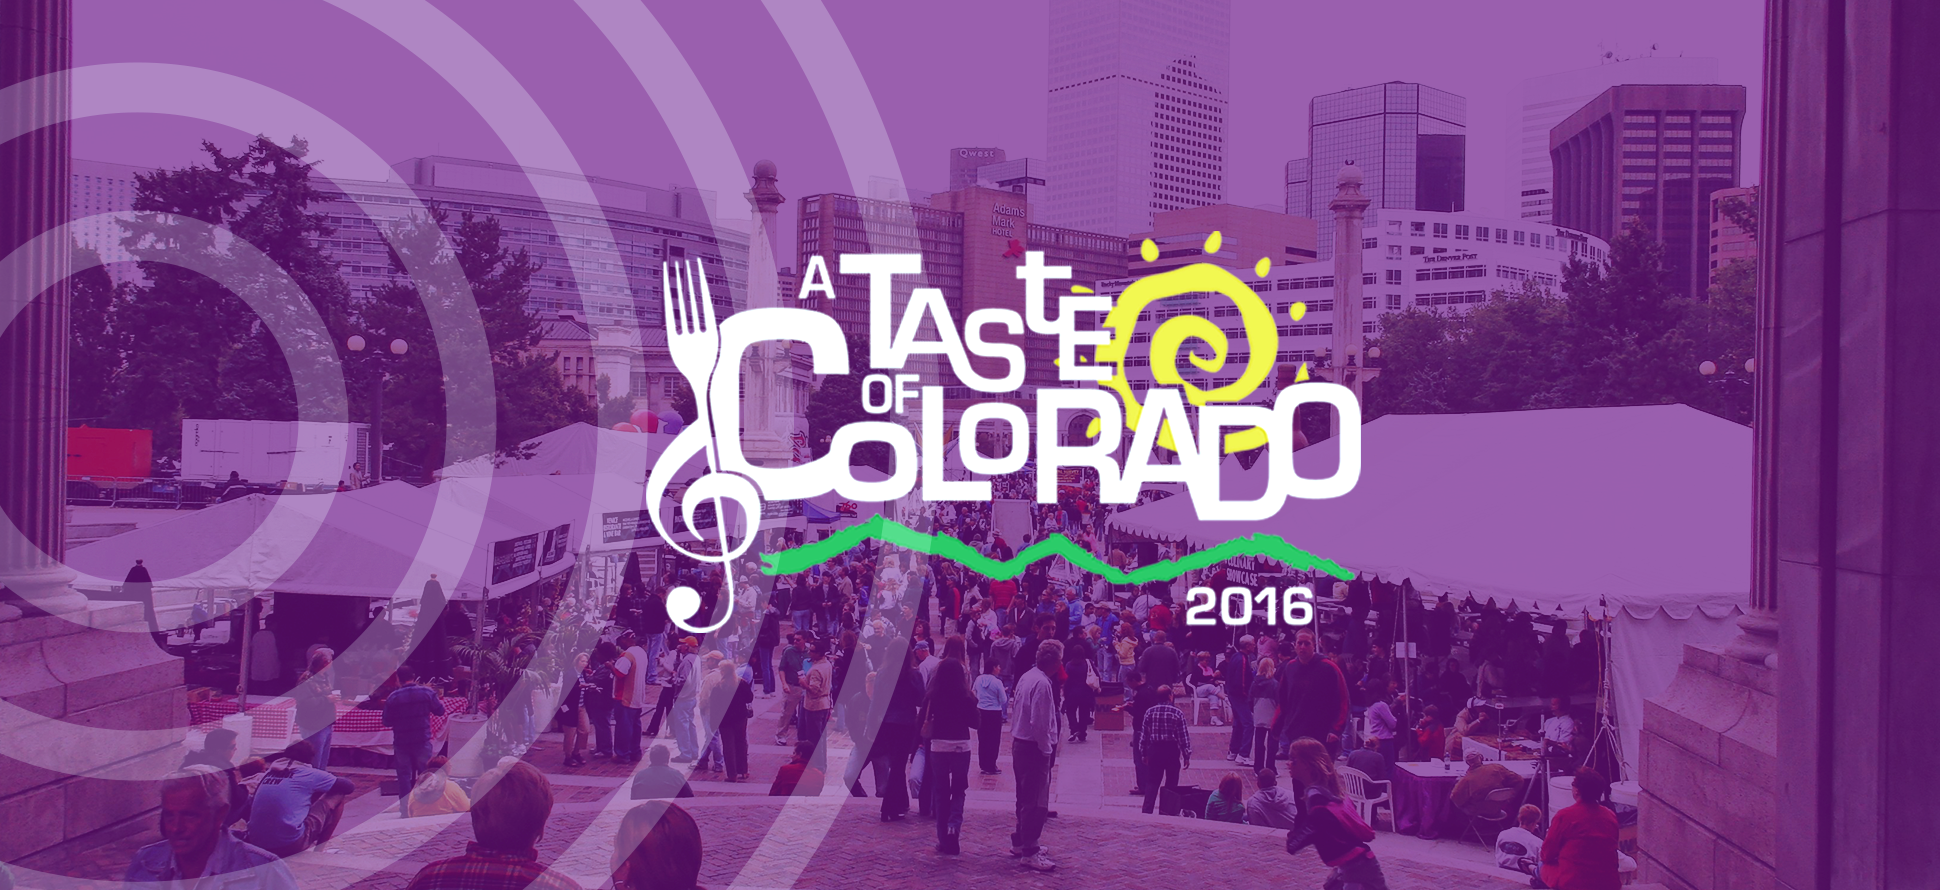 A Taste of Colorado: What to Know Before You Go